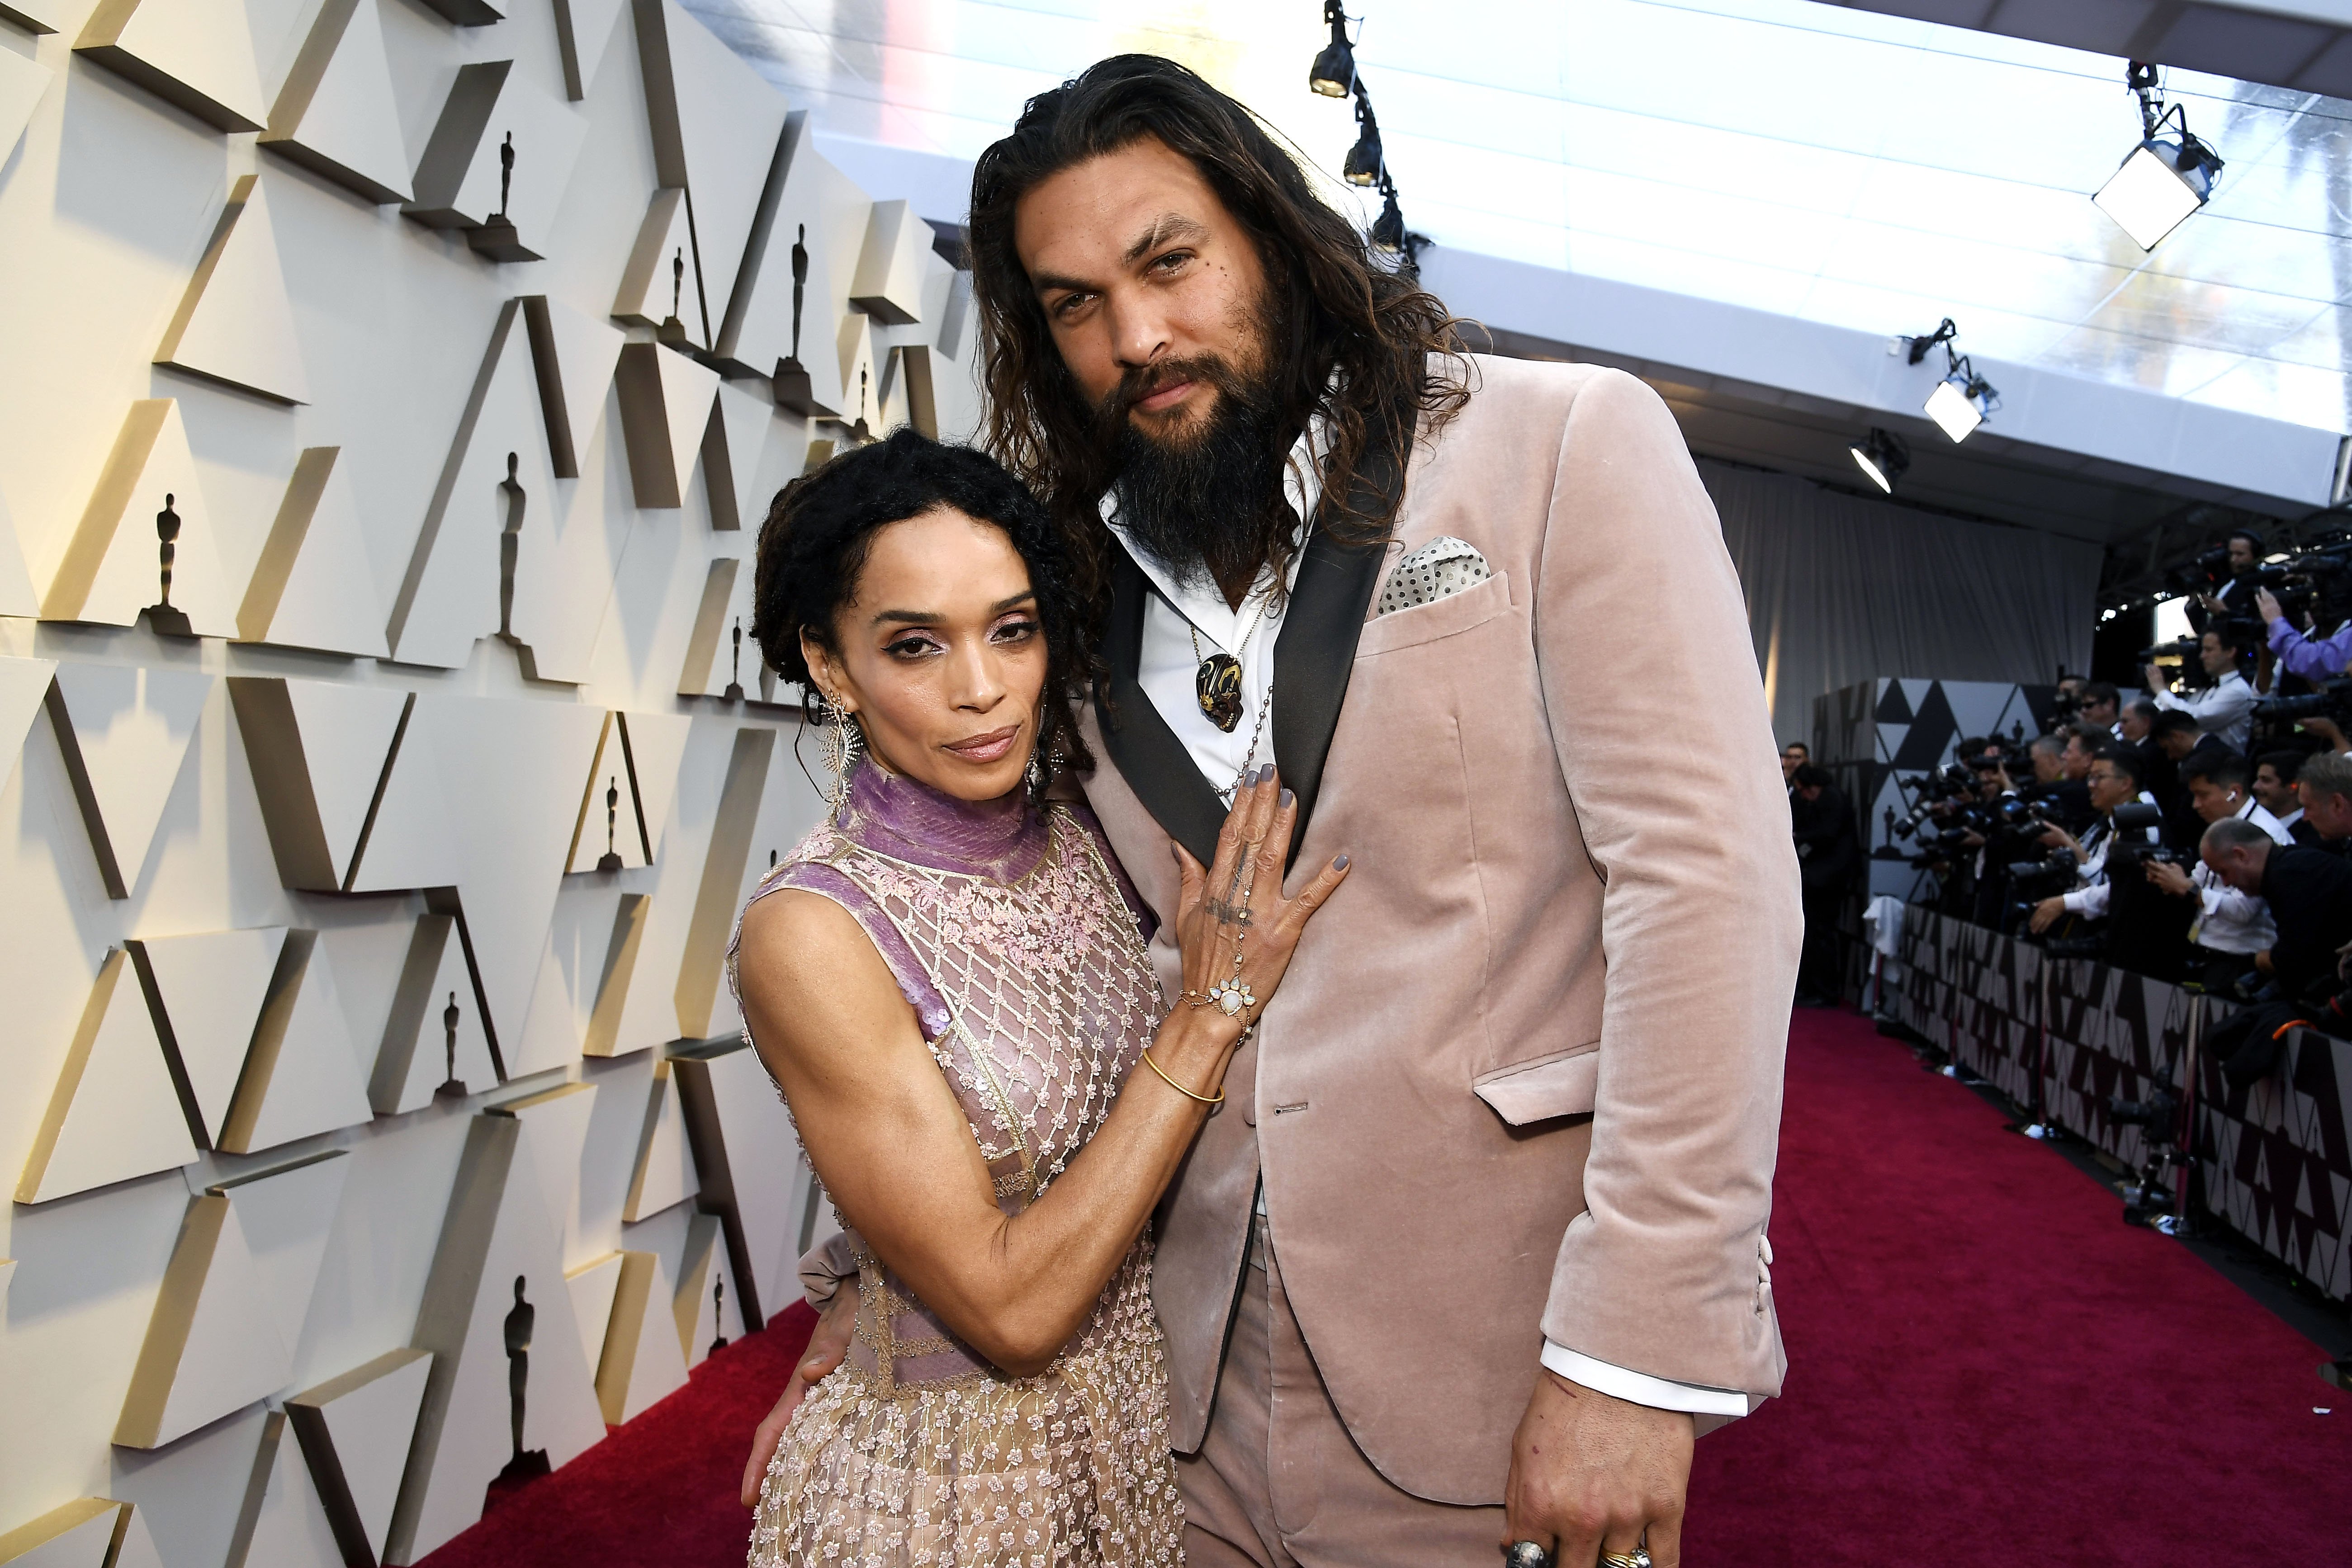 Lisa Bonet and Jason Momoa attend the 91st Annual Academy Awards at Hollywood and Highland on February 24, 2019 in Hollywood, California. / Source: Getty Images